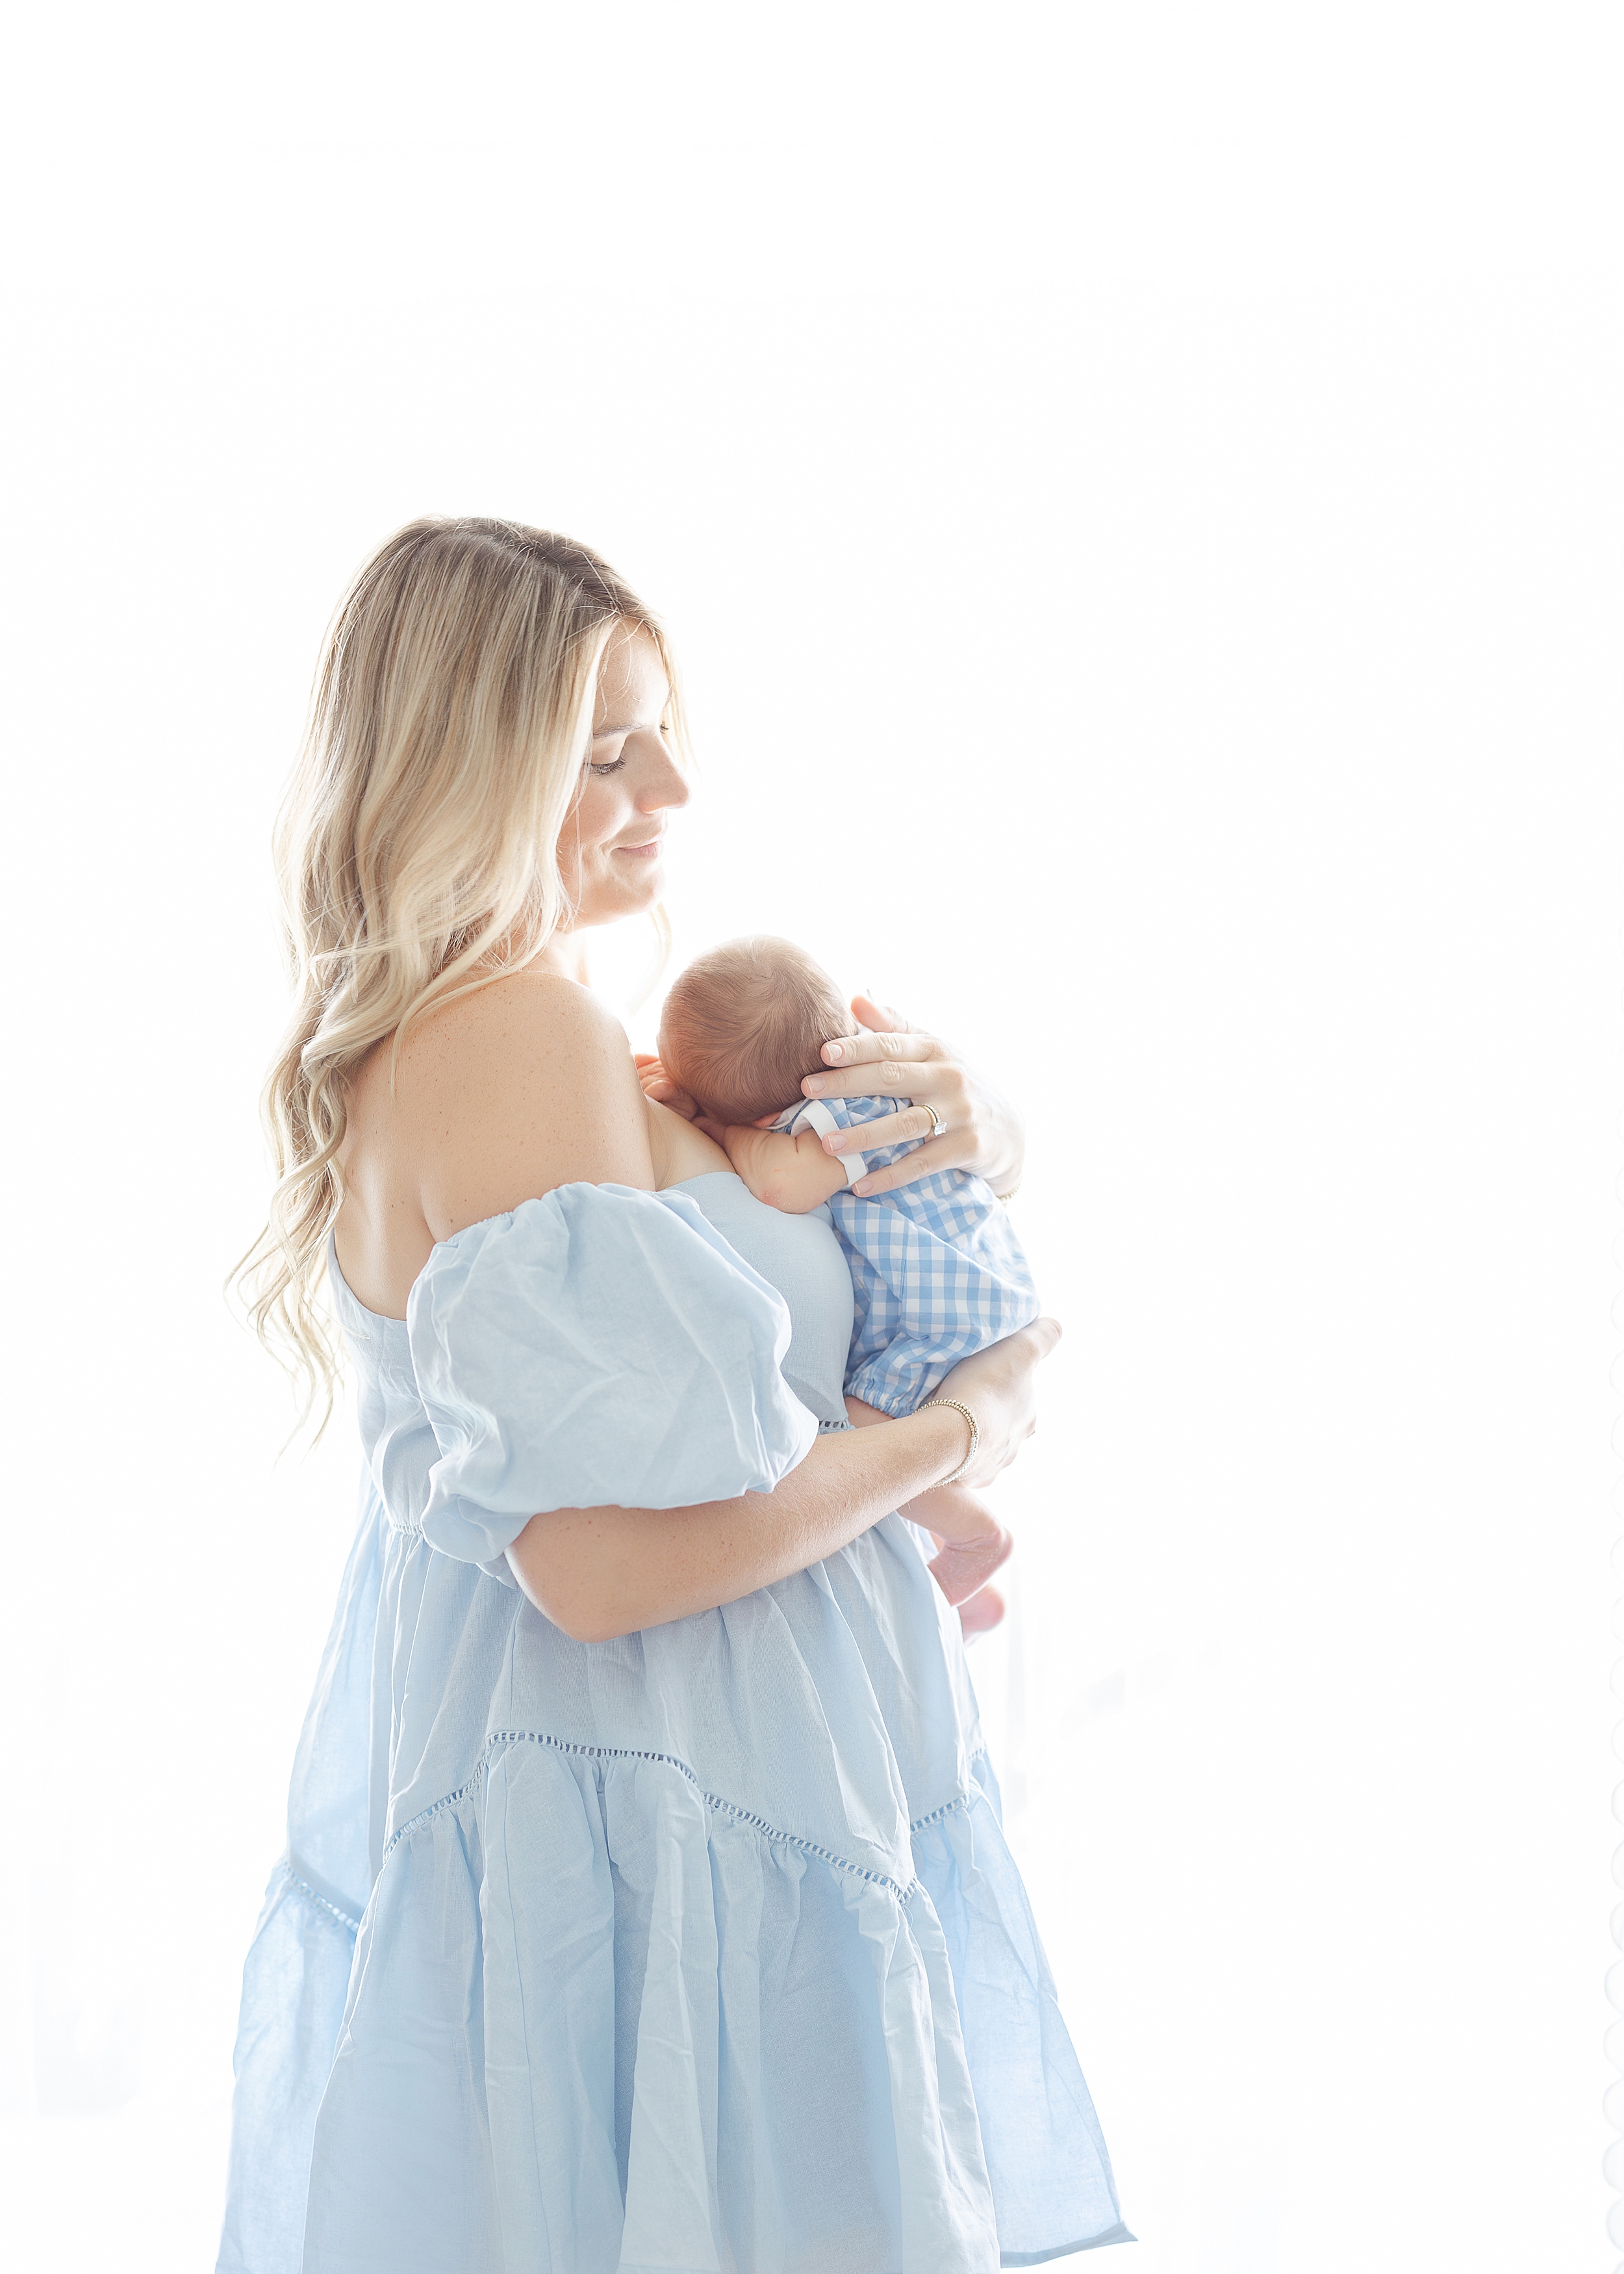 Light filled airy newborn portrait of blonde woman in pale blue dress holding baby boy.